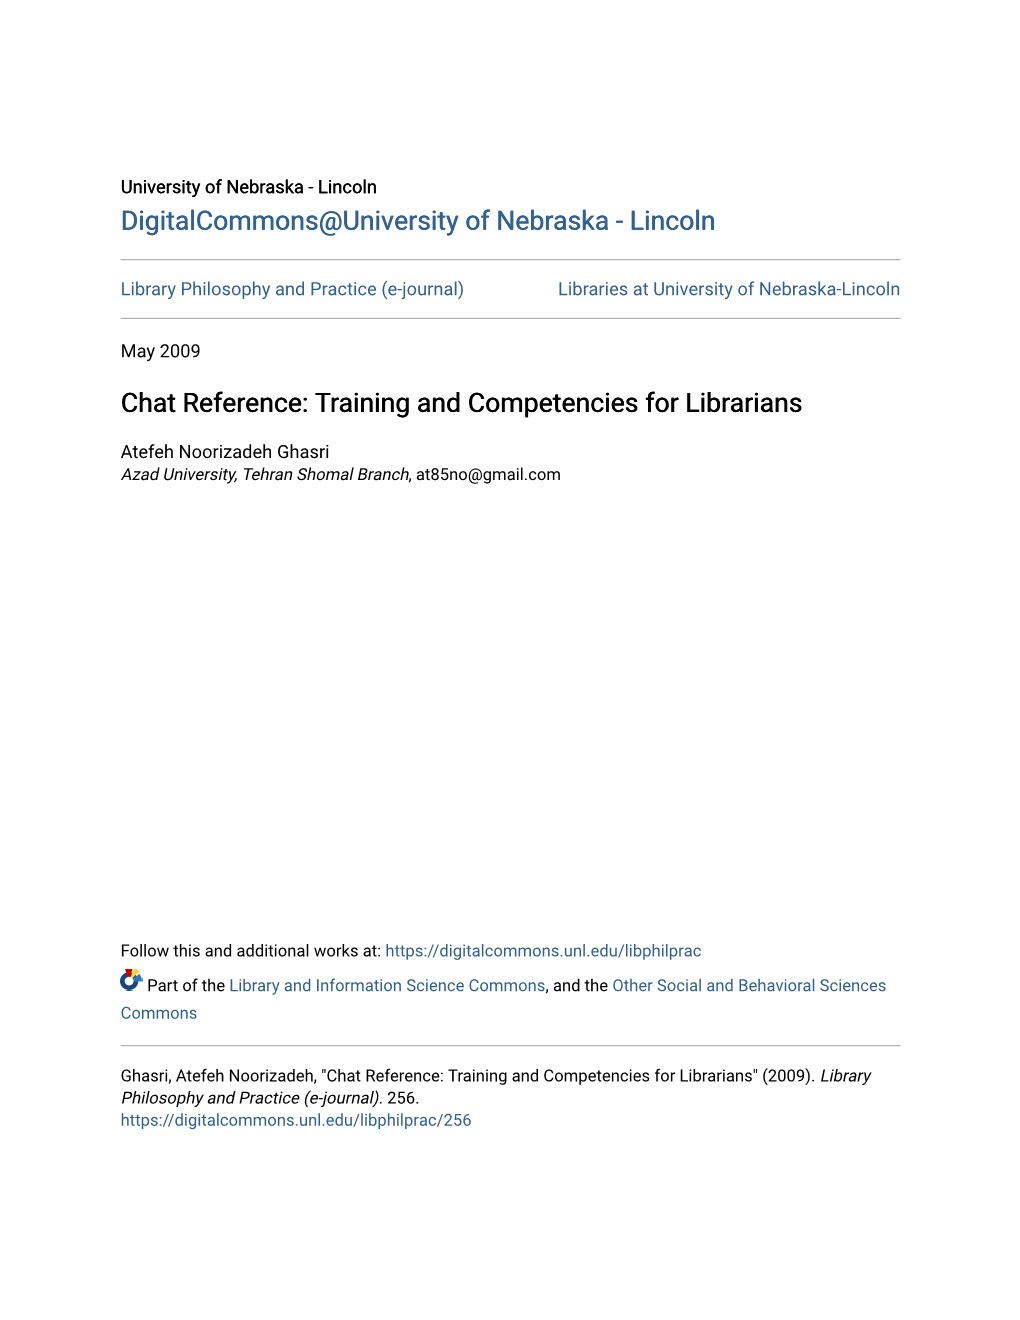 Chat Reference: Training and Competencies for Librarians